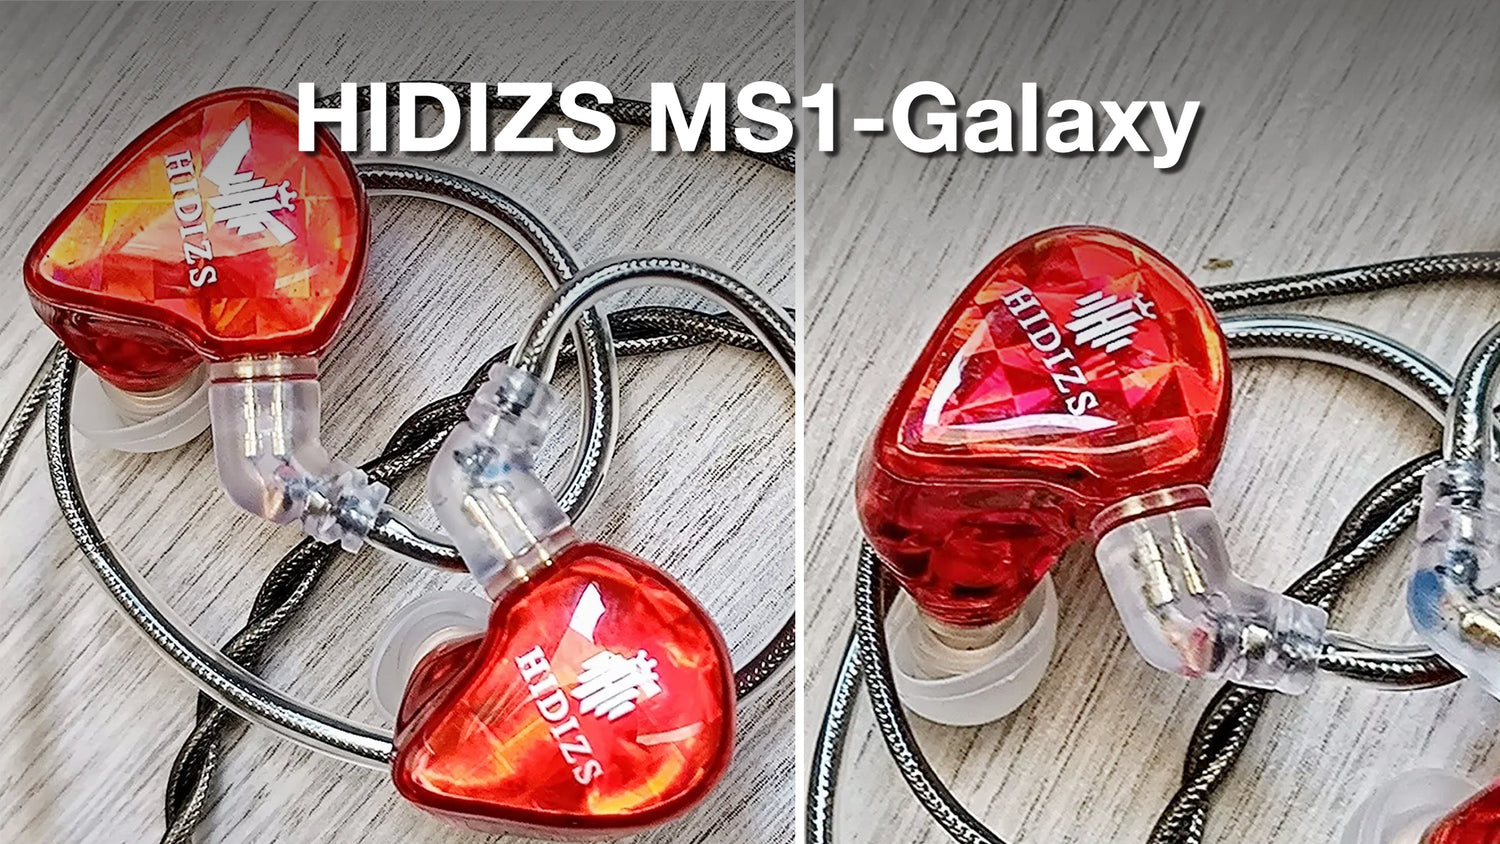 The Hidizs MS 1 Galaxy are incredible headphones ，designed with a popular tuning, making it ideal for casual use.